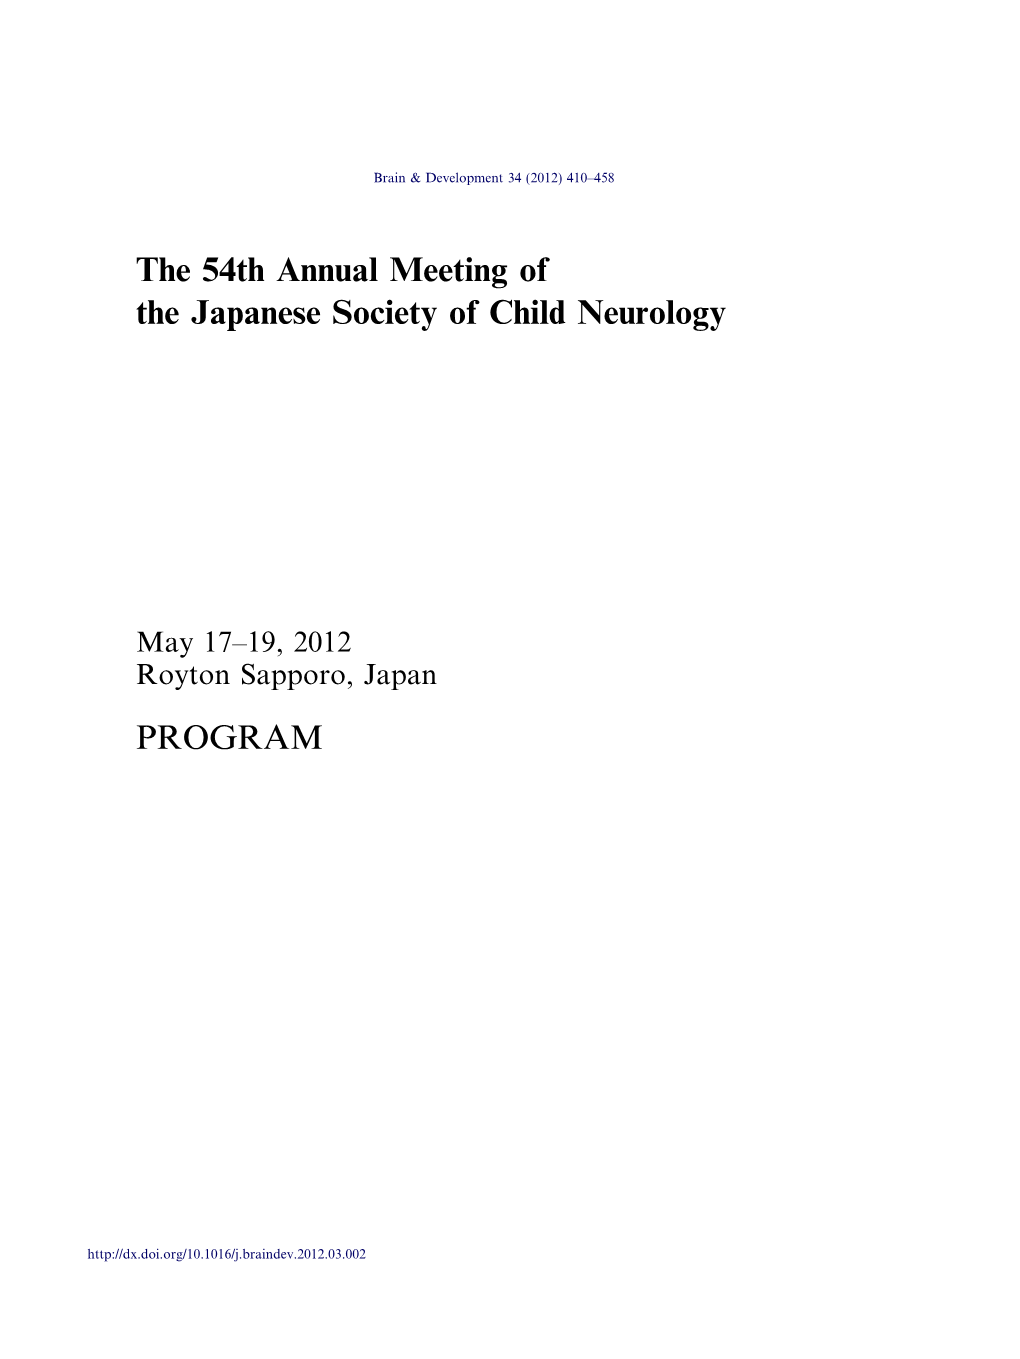 The 54Th Annual Meeting of the Japanese Society of Child Neurology